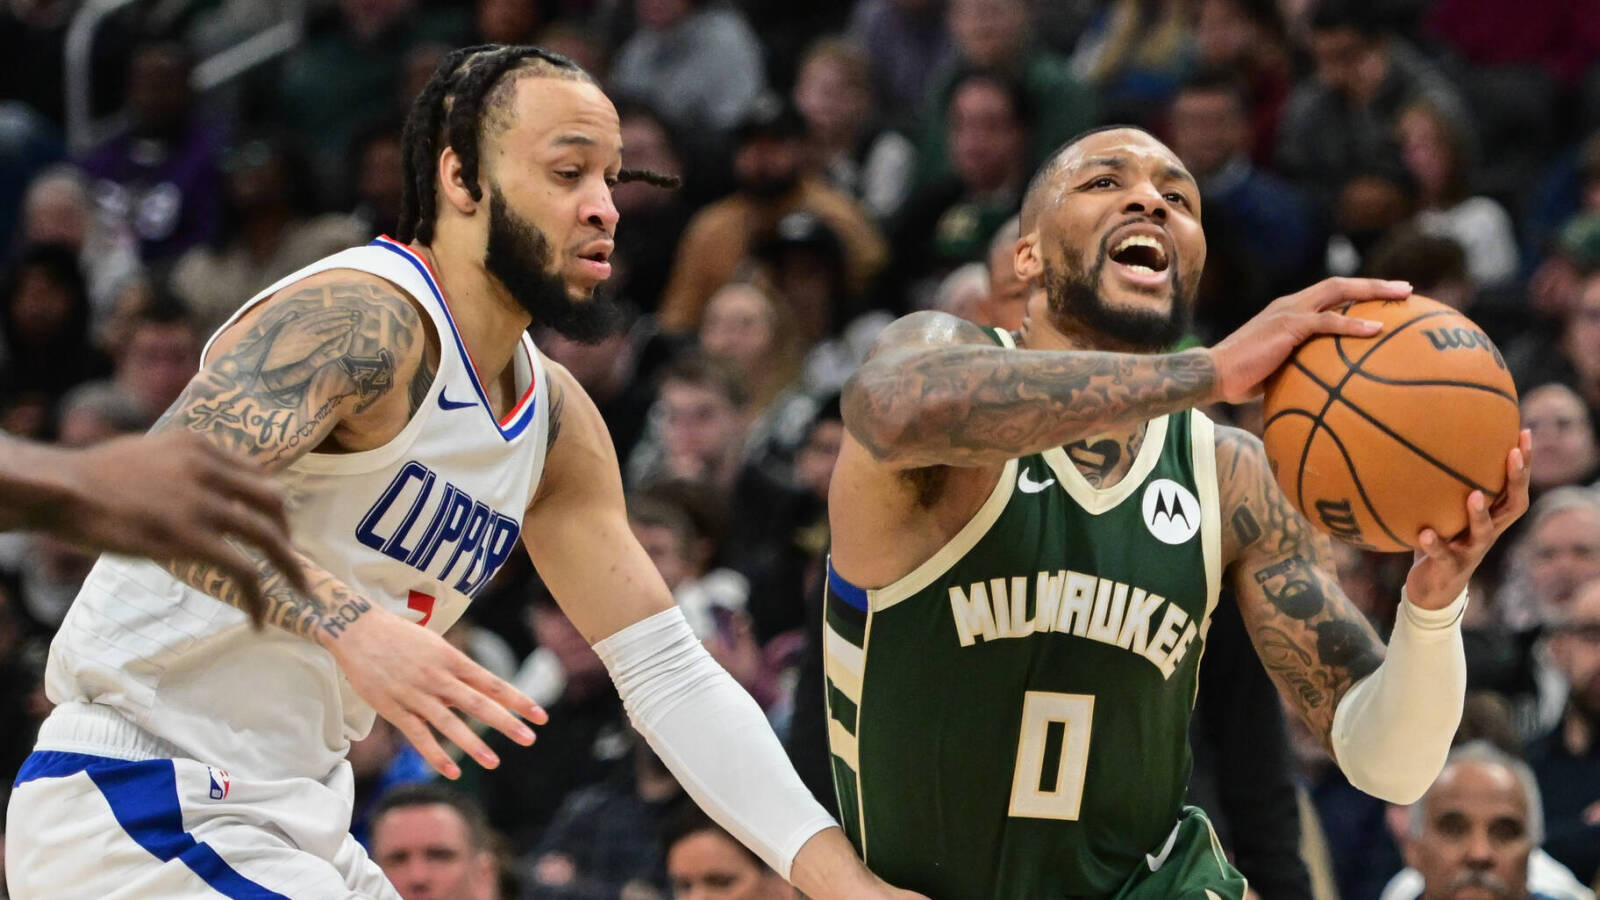 Watch: Damian Lillard comes up big in fourth as Bucks down Clippers sans Giannis Antetokounmpo